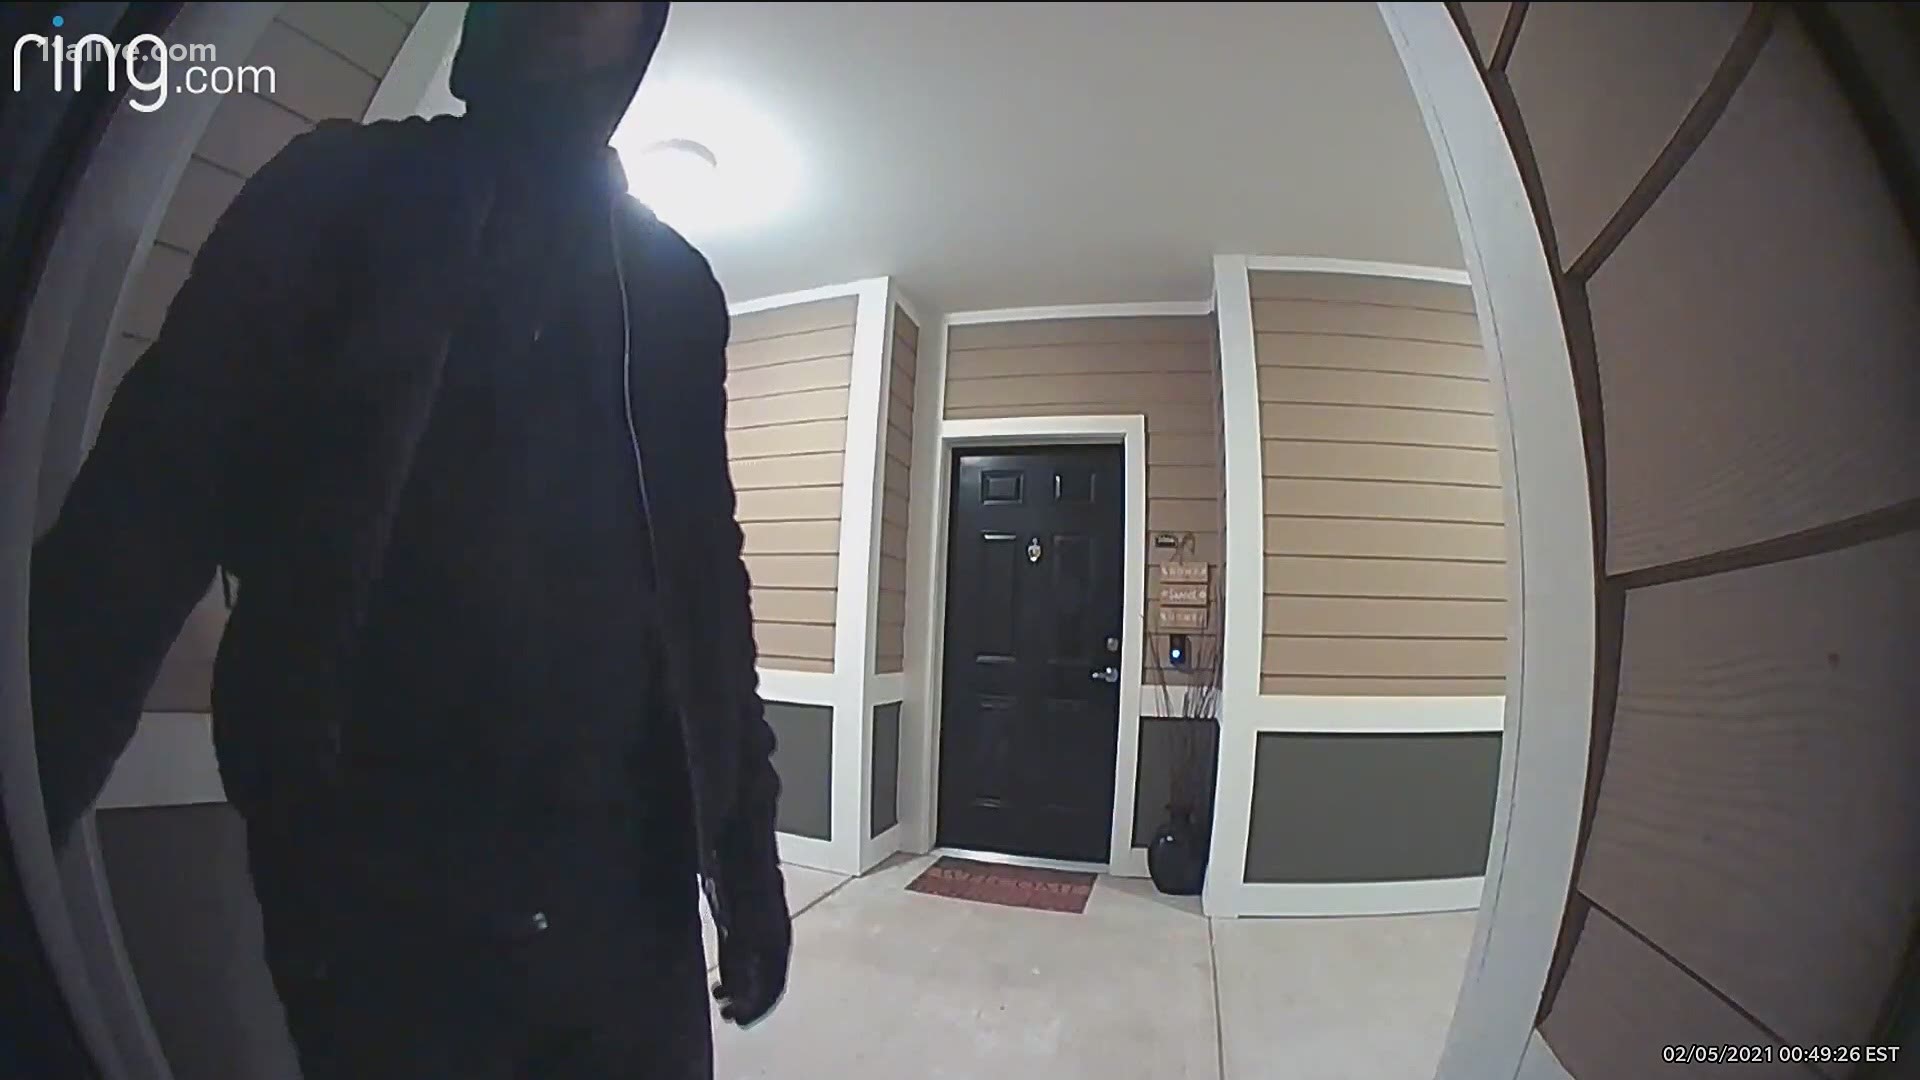 Police said the man they believe committed the assault was caught on a neighbor's doorbell camera.